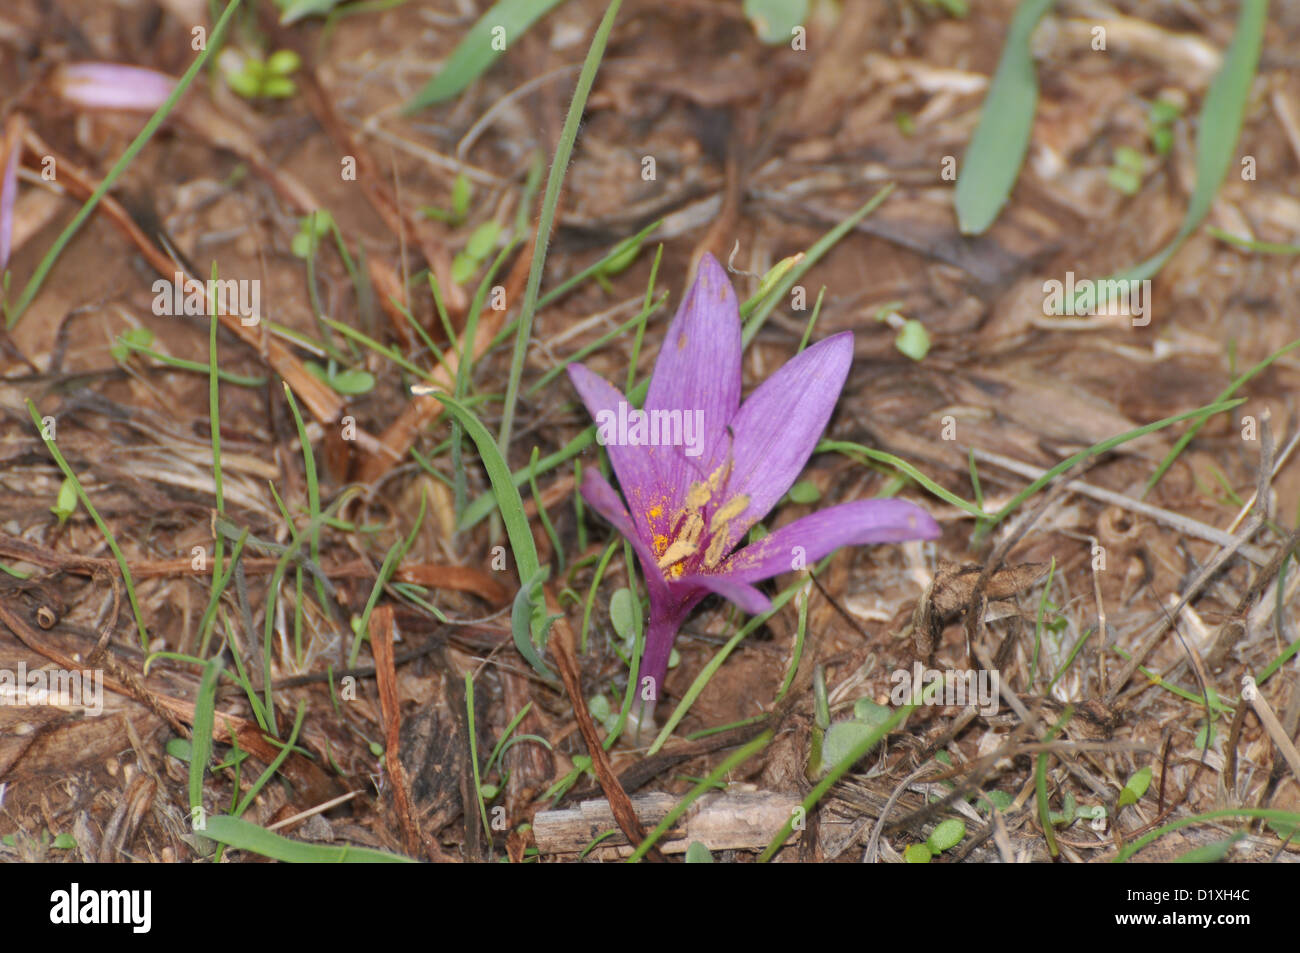 Autumn Crocus (Crocus cancellatus) Preparations from the roots and seeds of this plant are used to treat gout and rheumatism. Stock Photo